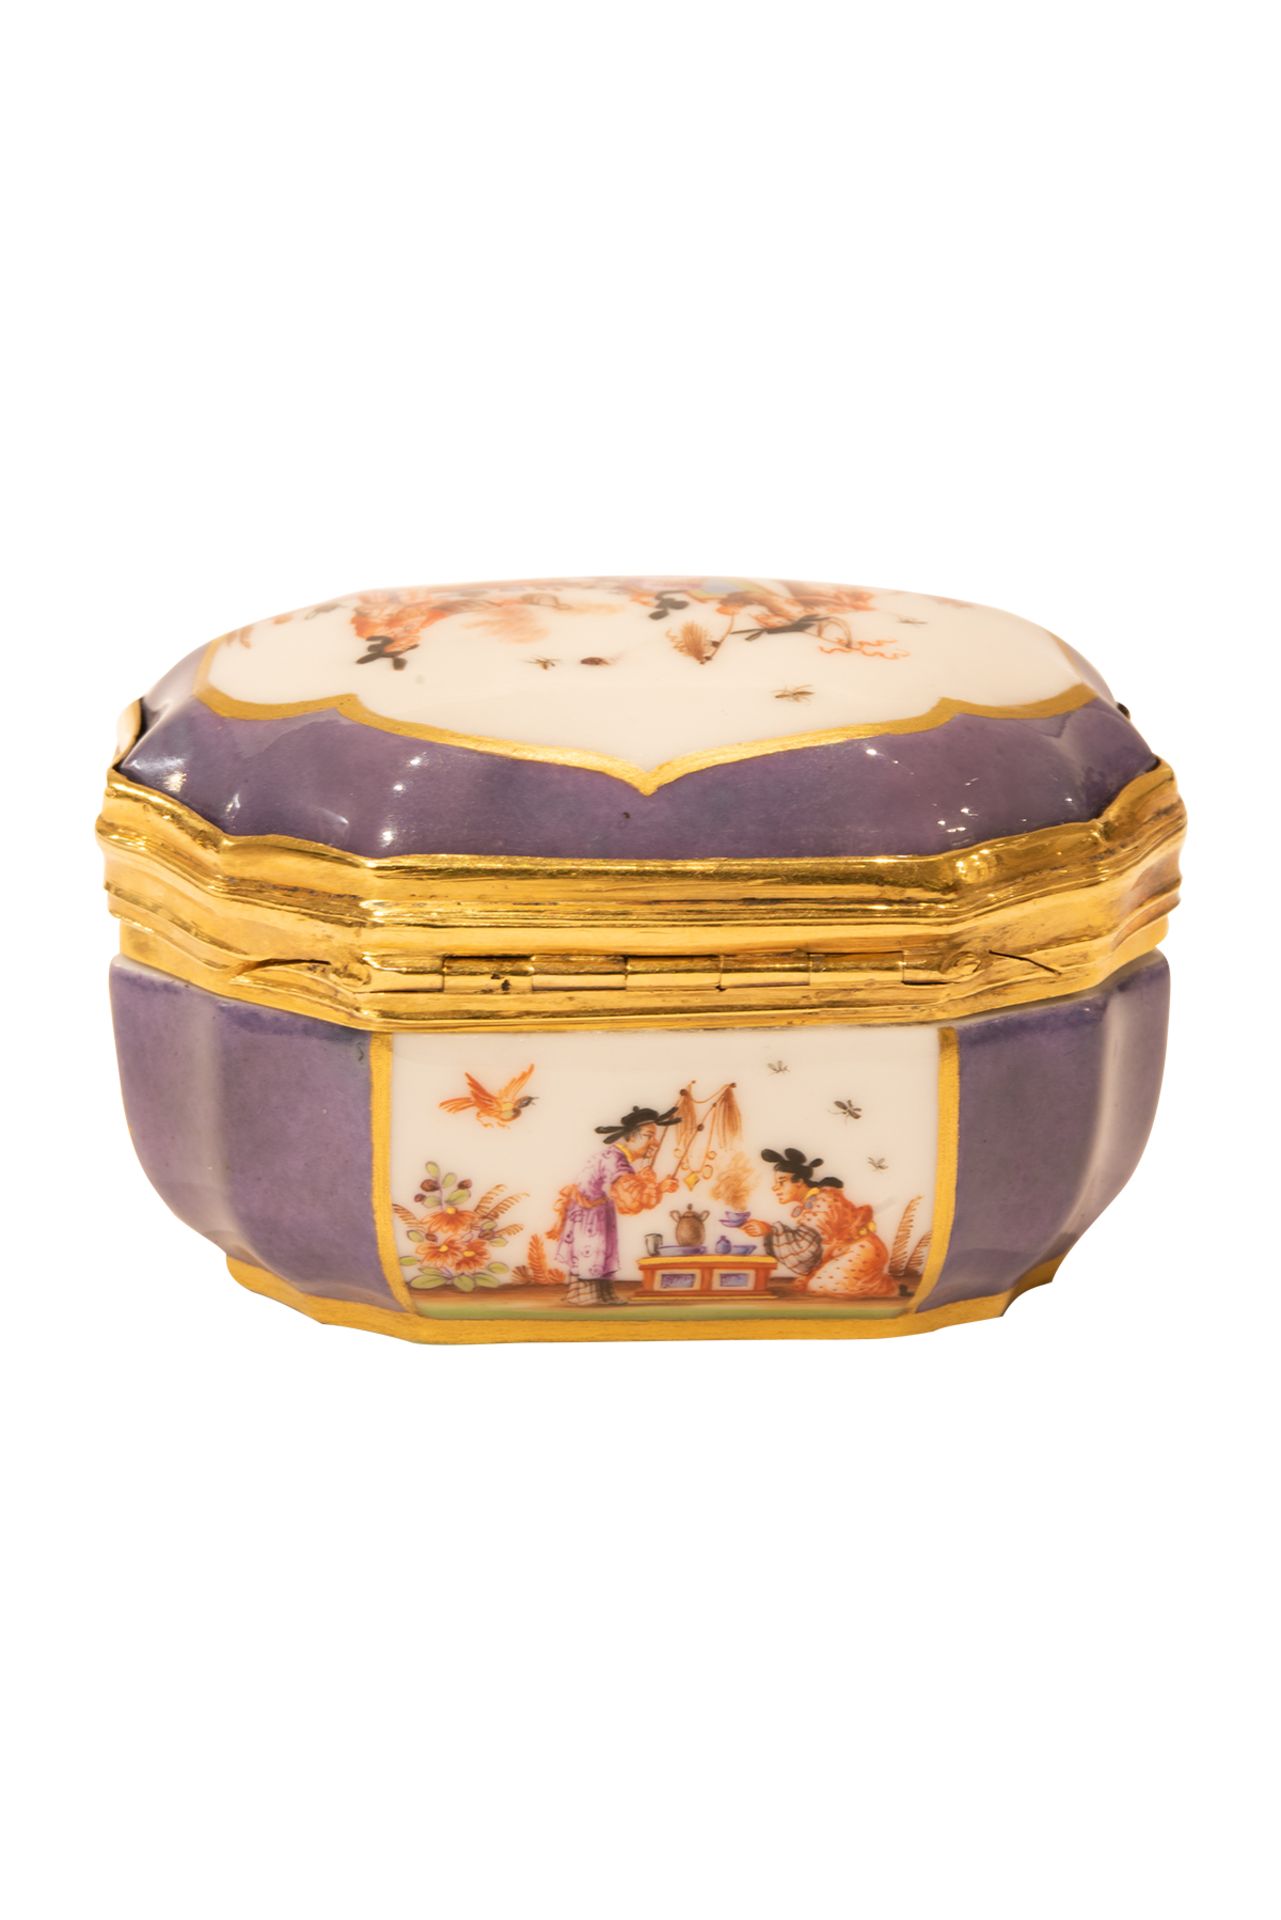 Tabatiere with chinoiseries, Meissen around 1750 - Image 6 of 8